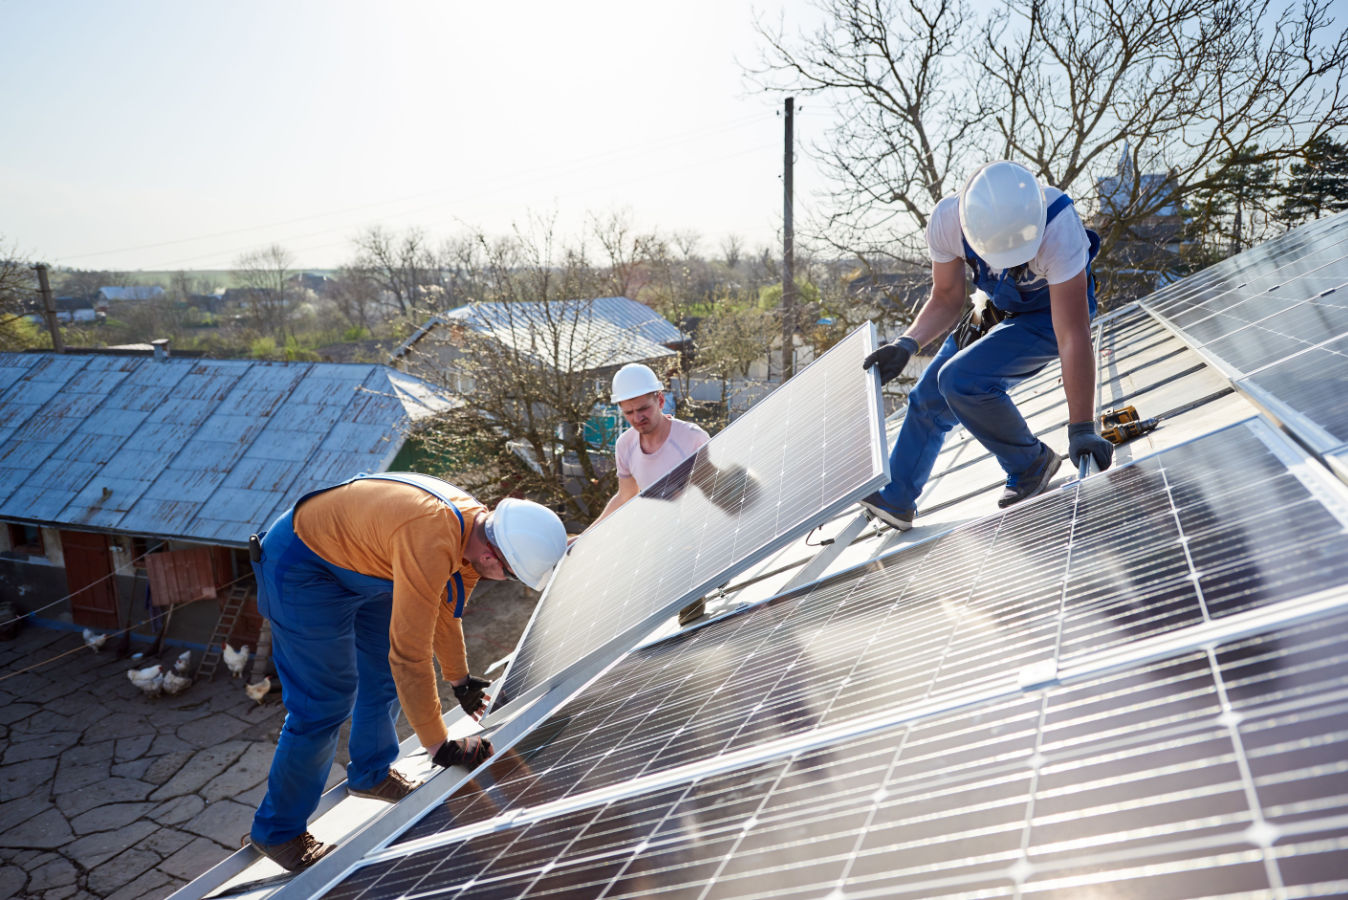 Three person team on a roof installing solar panels.